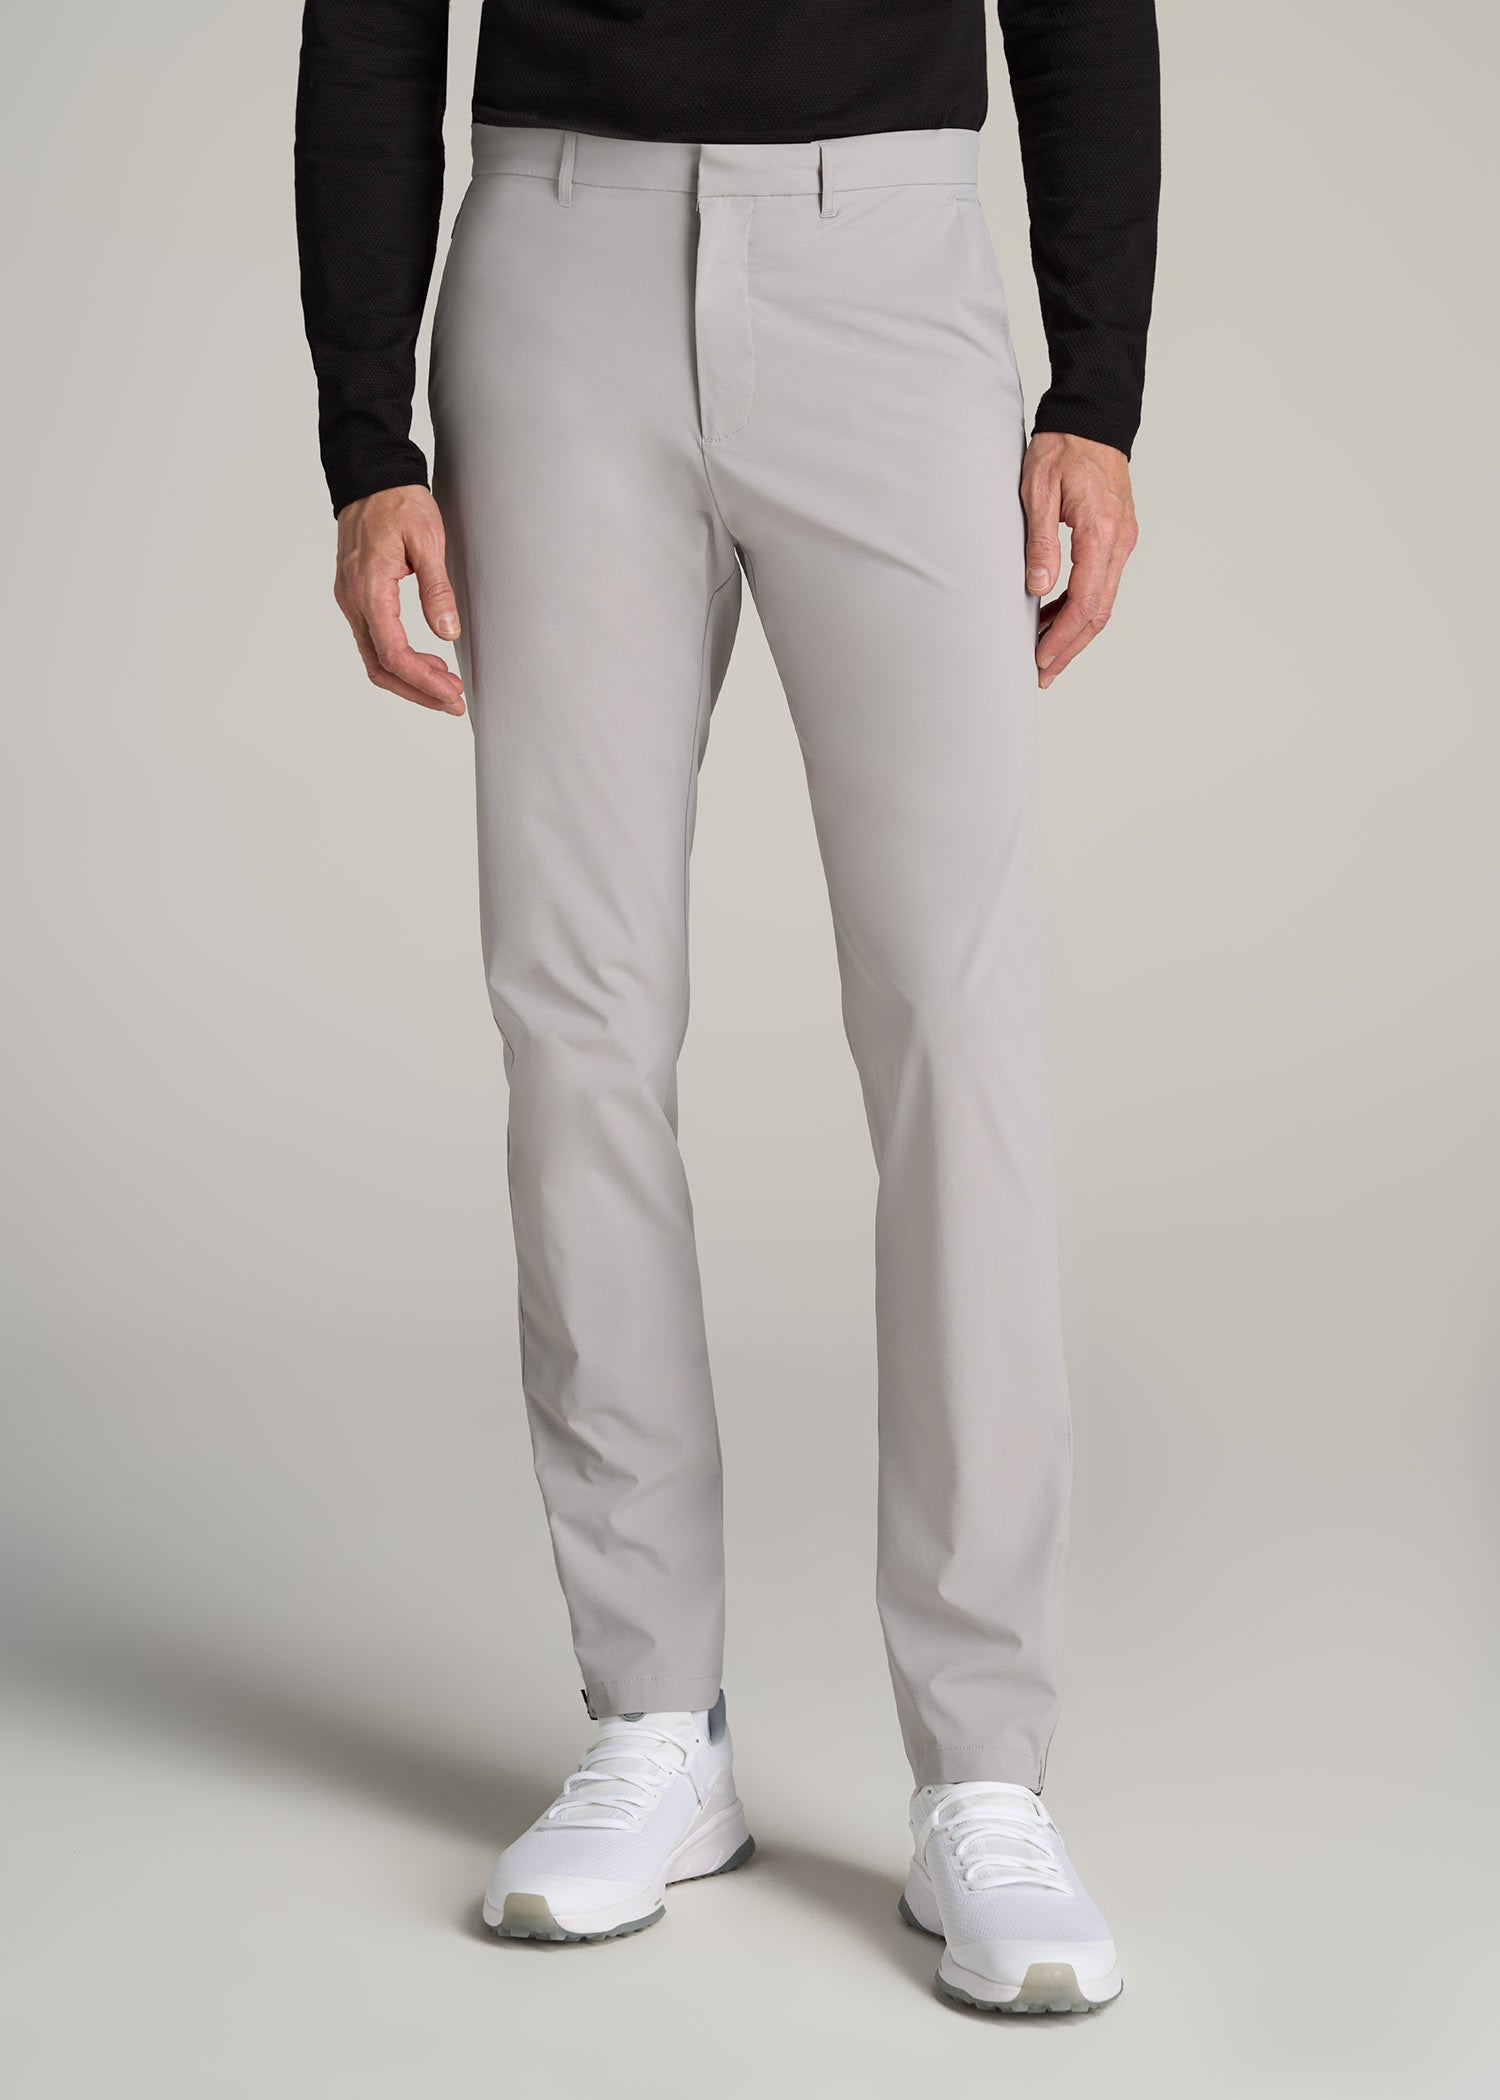 Performance TAPERED-FIT Chino Pants for Tall Men in Light Grey